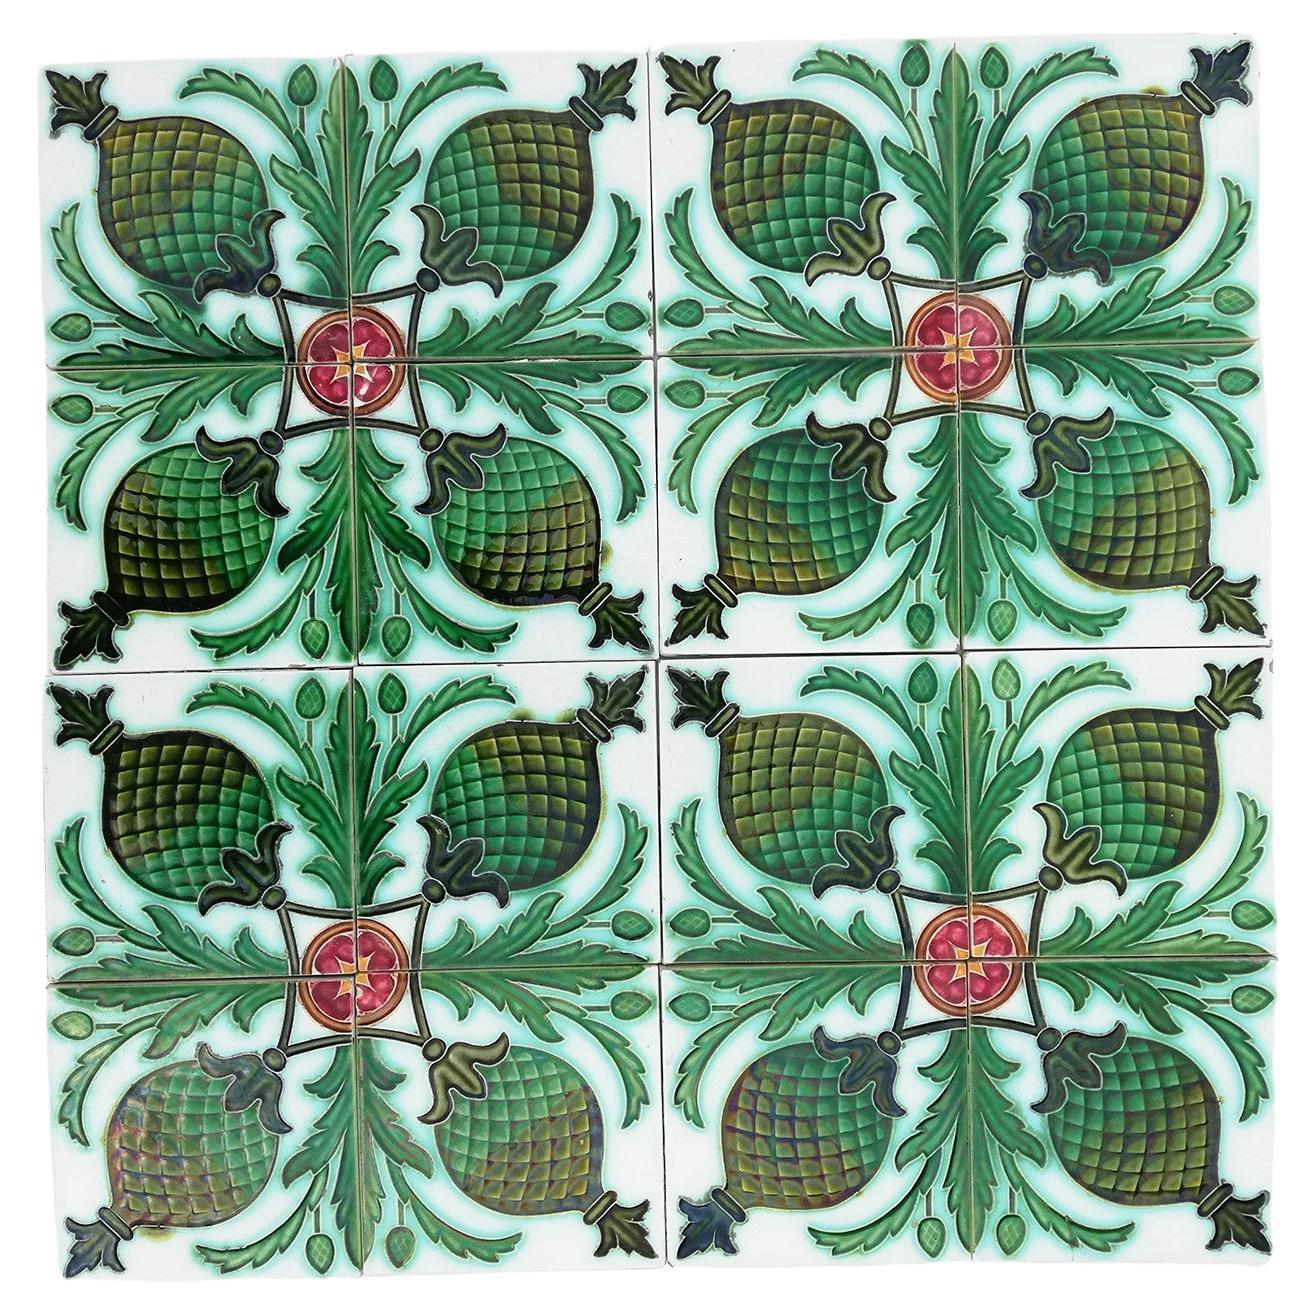 Tableau of 16 Green Glazed Relief Tiles Set by, Belgium